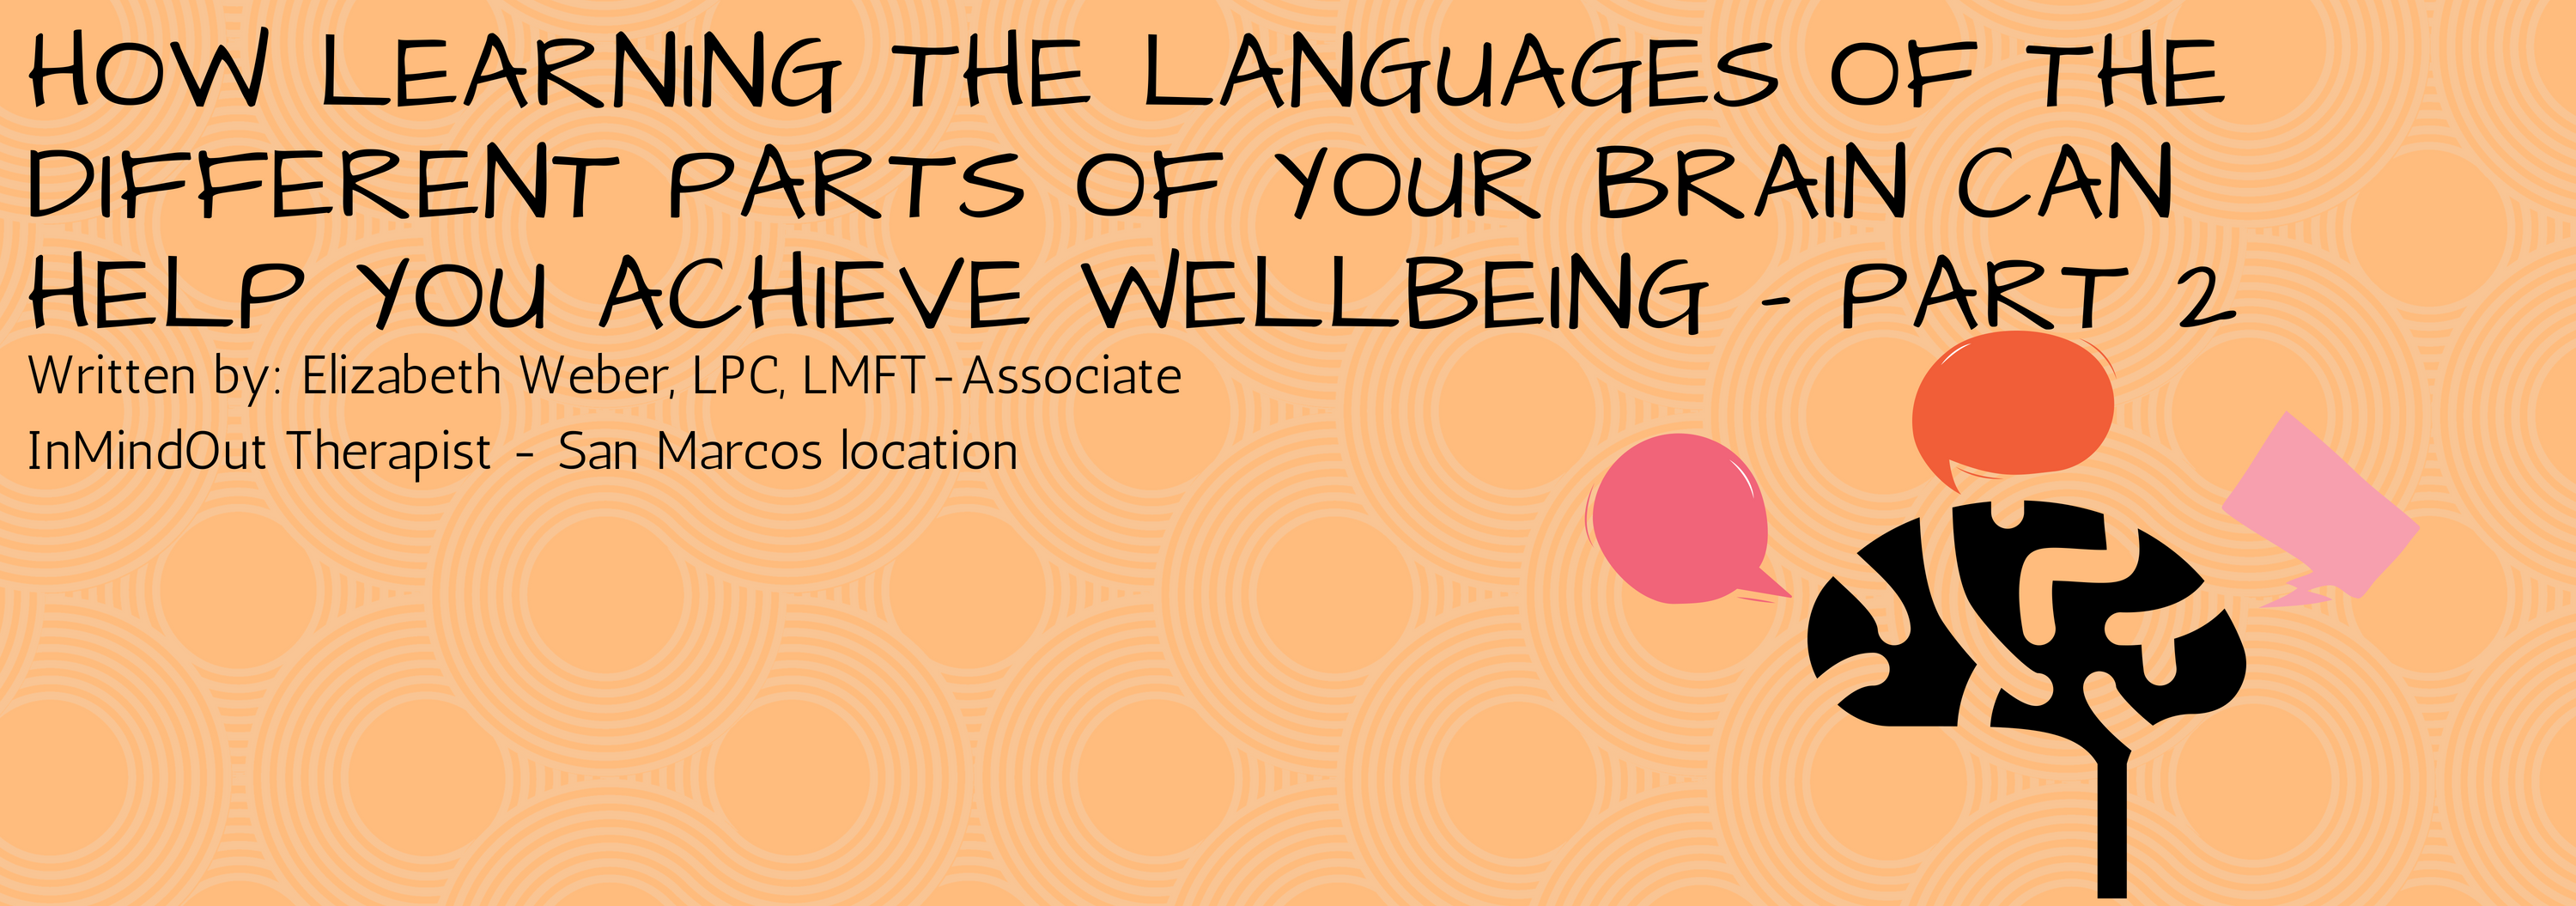 How Learning the Languages of The Different Parts of Your Brain Can Help You Achieve Wellbeing – Part 2